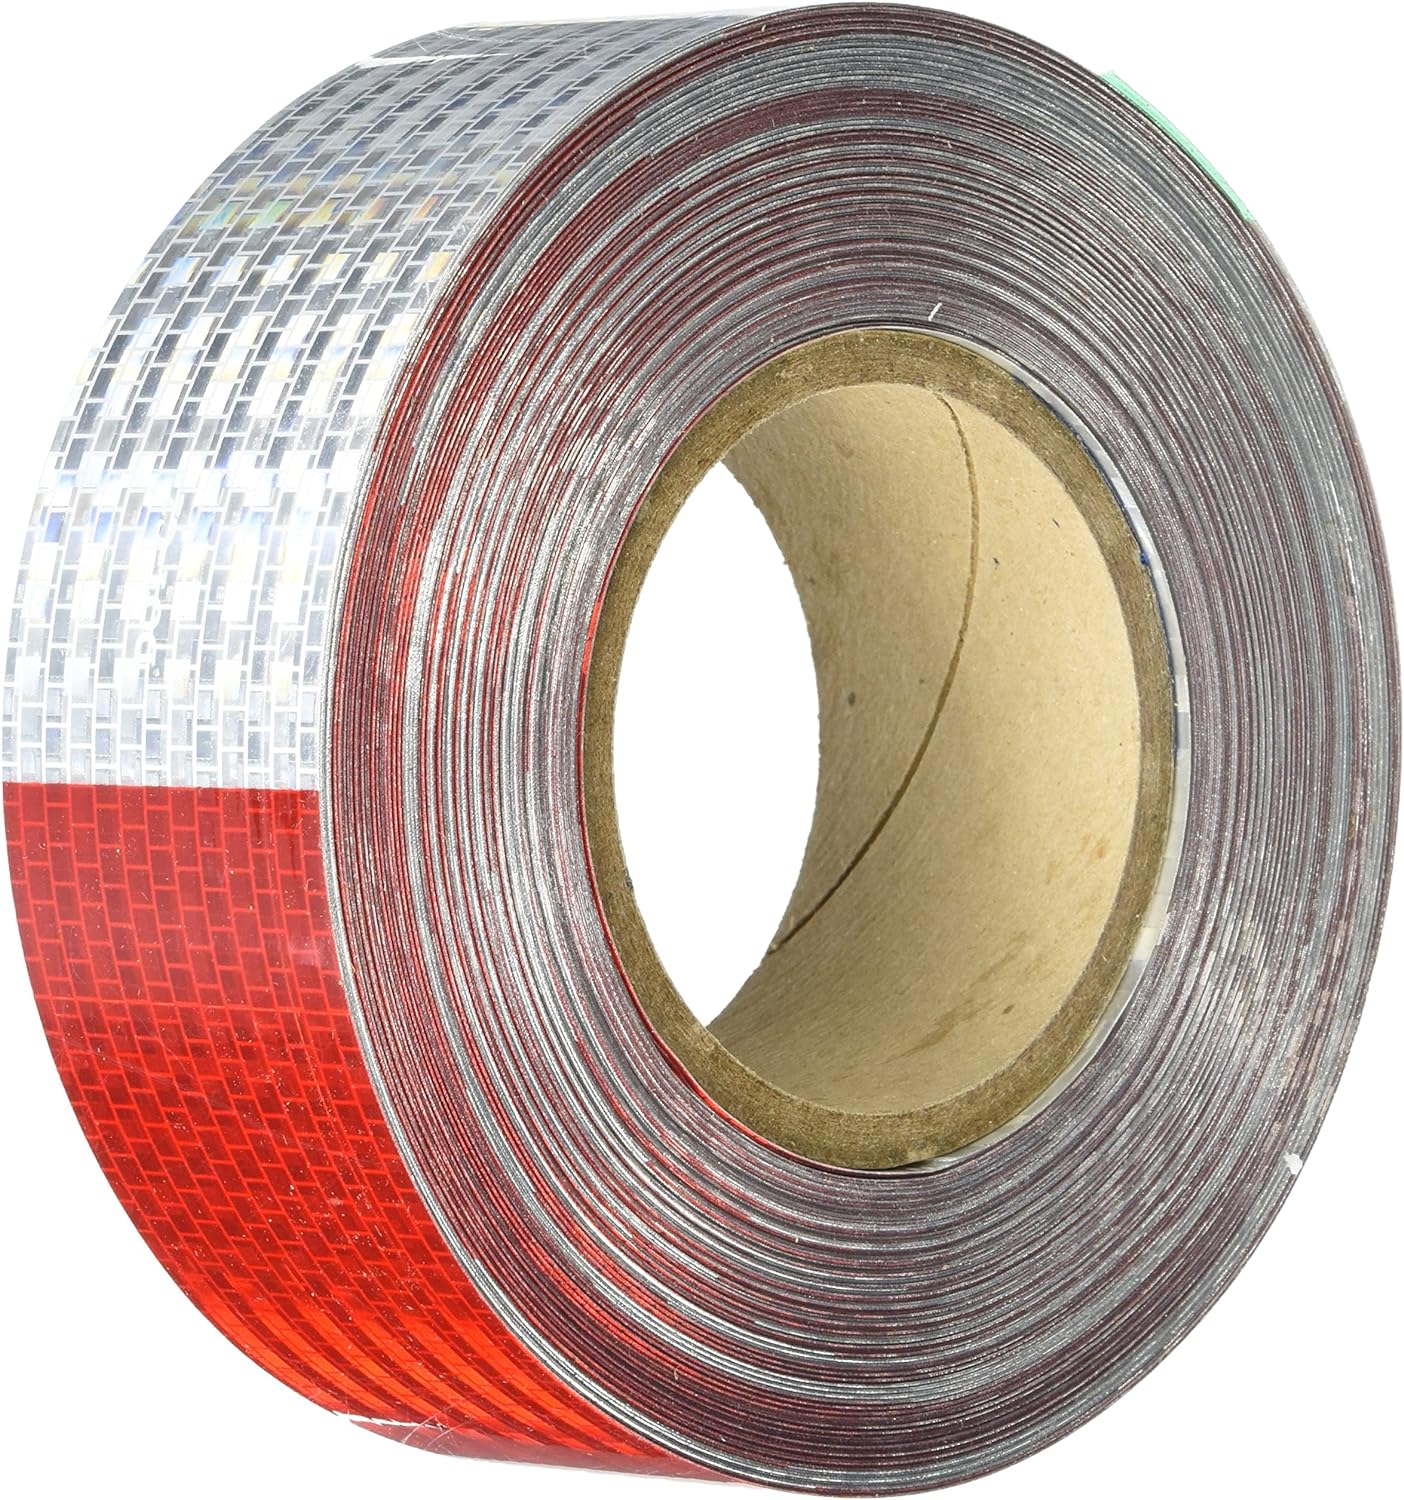 Grote 41160 2" x 150' Roll Conspicuity Tape